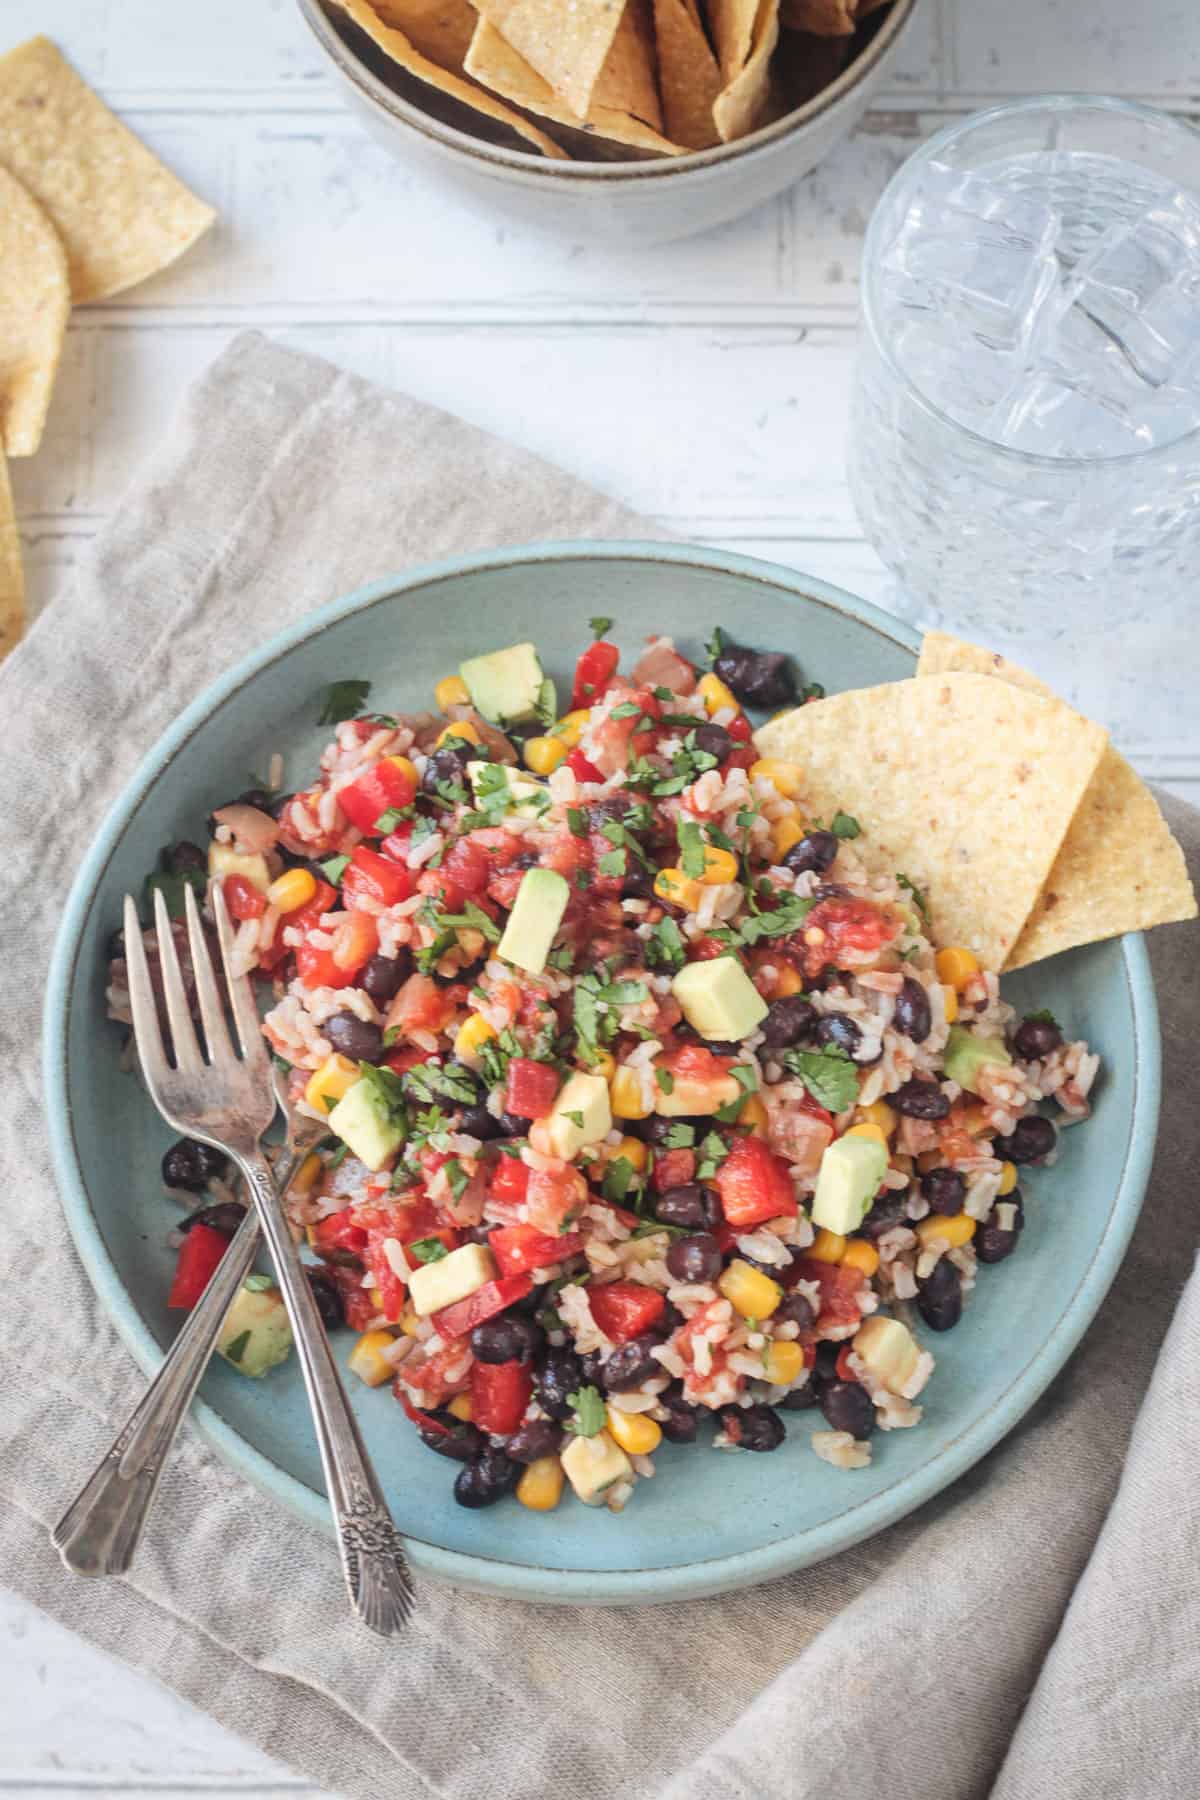 Rice, black beans, corn, diced red peppers, and avocado mixed together on a blue plate with a fork.